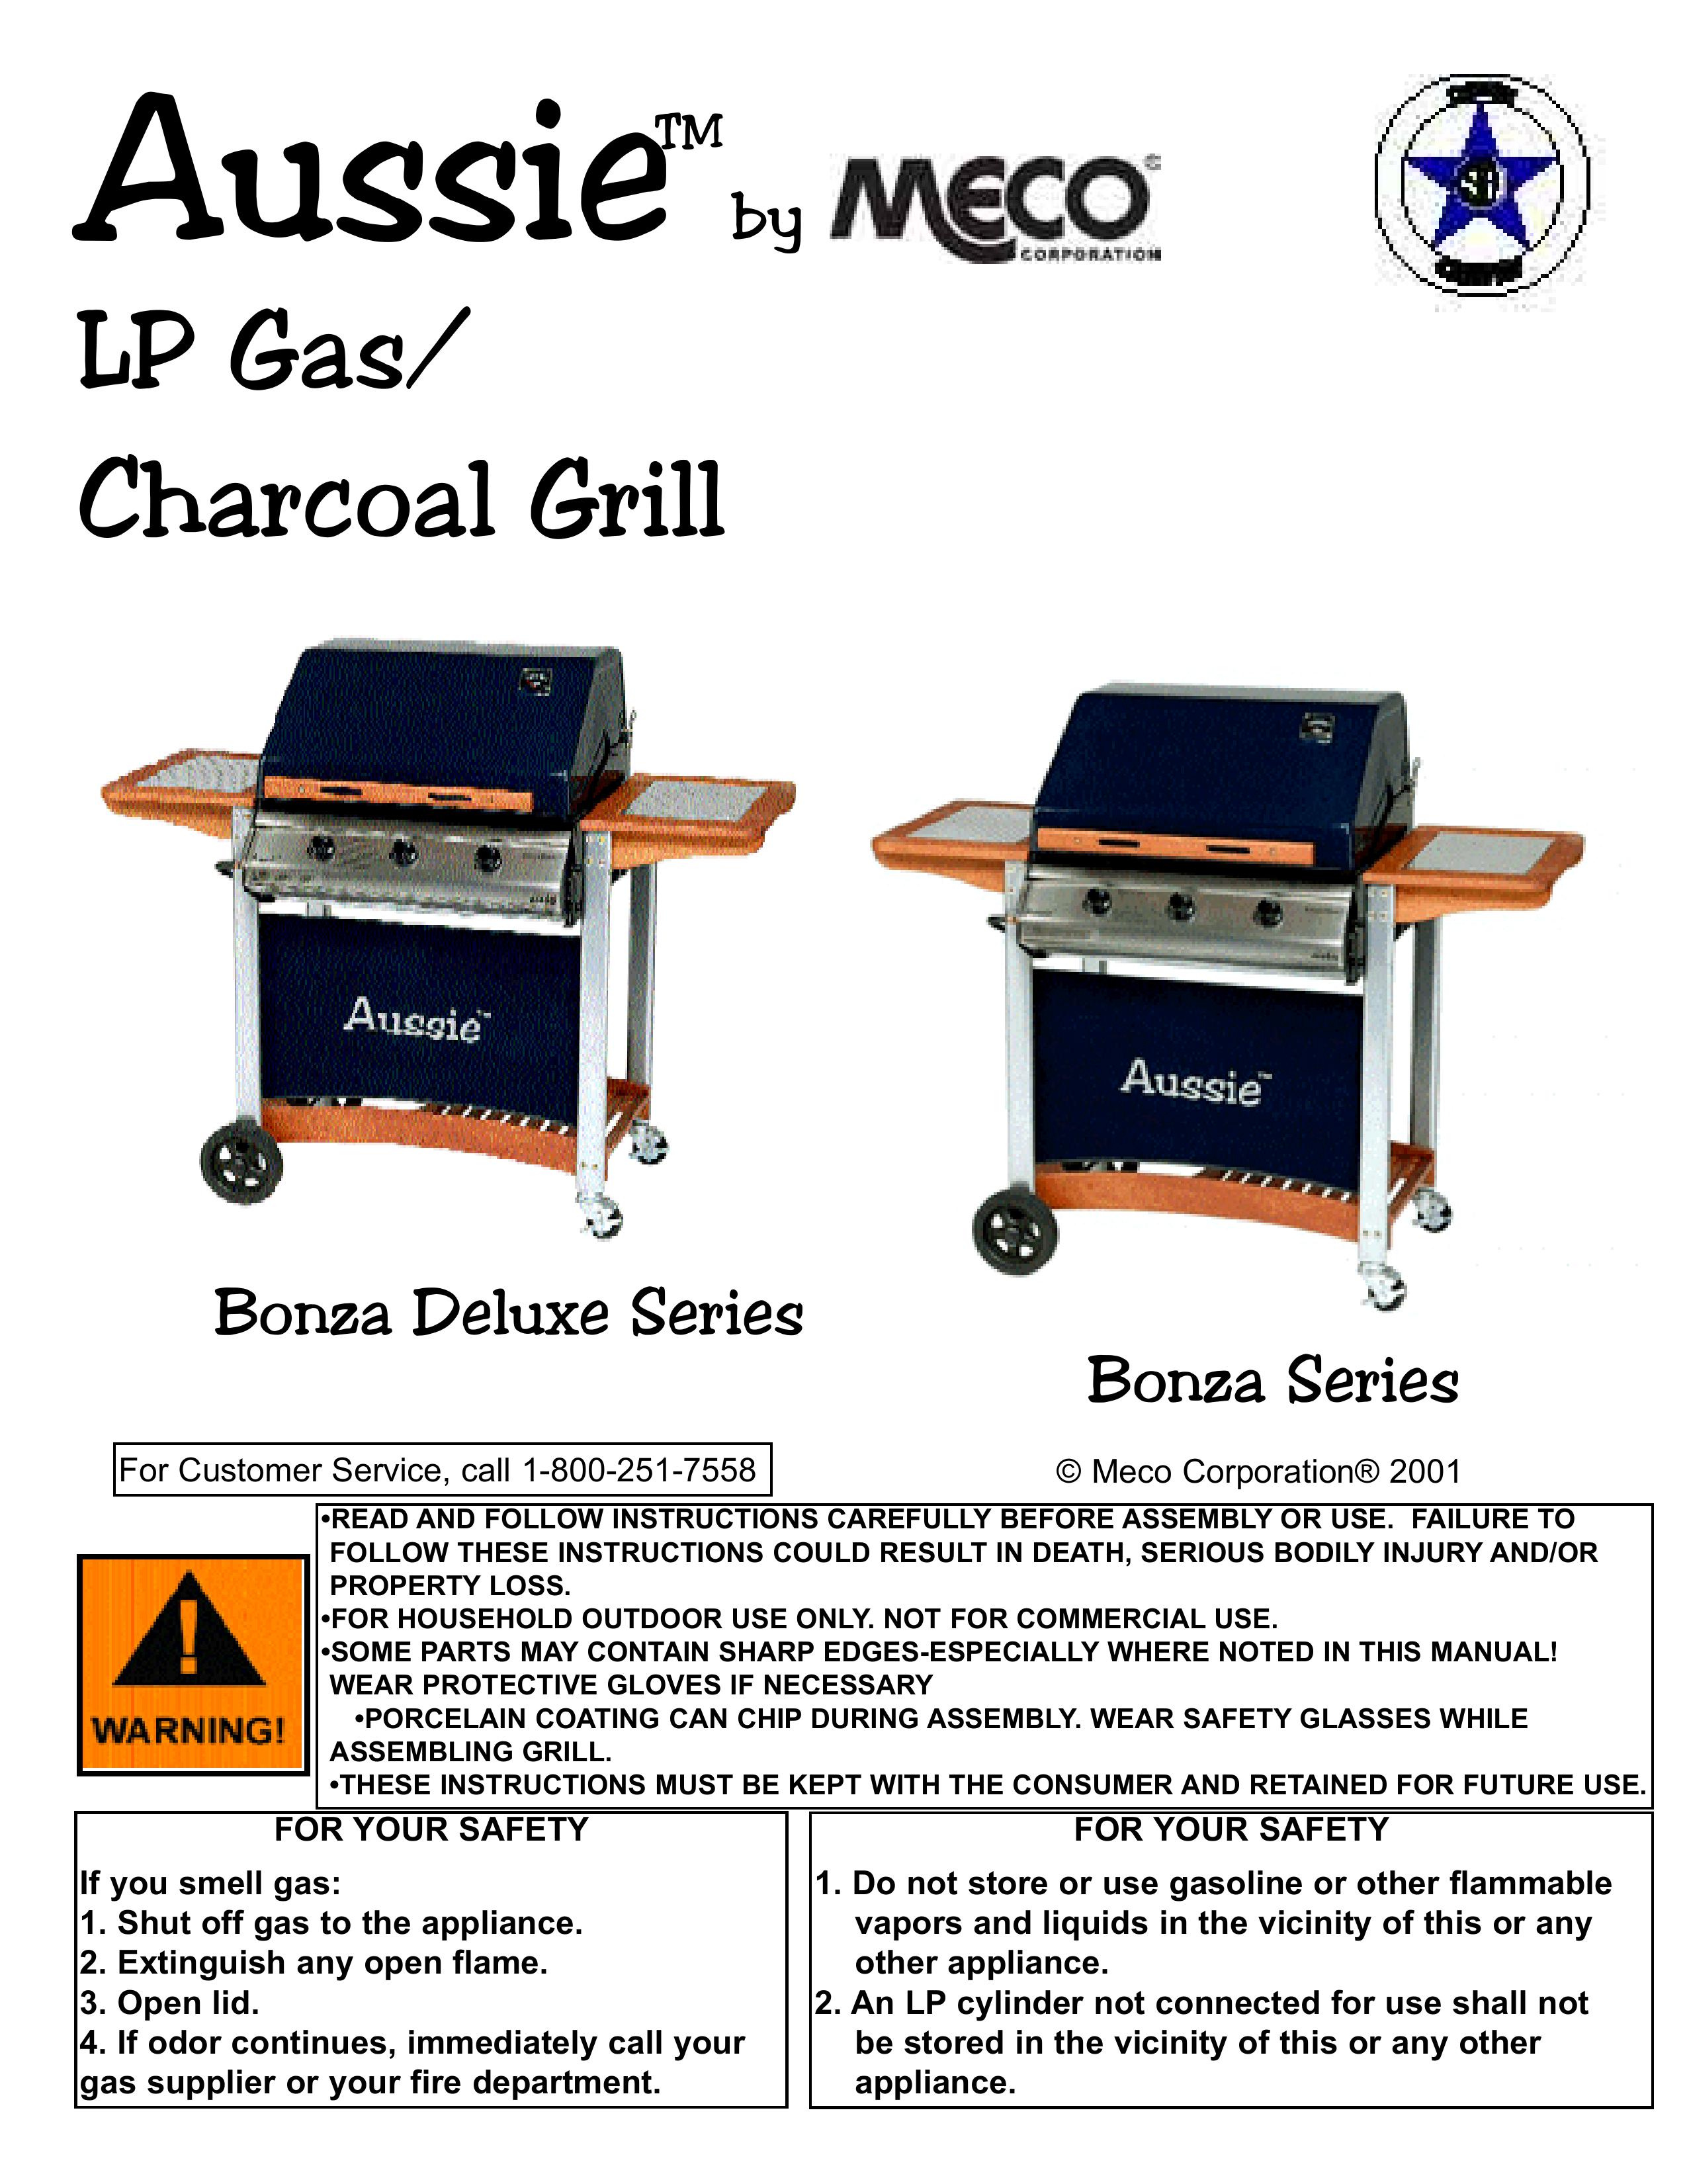 Meco Bonza Deluxe Series Charcoal Grill User Manual